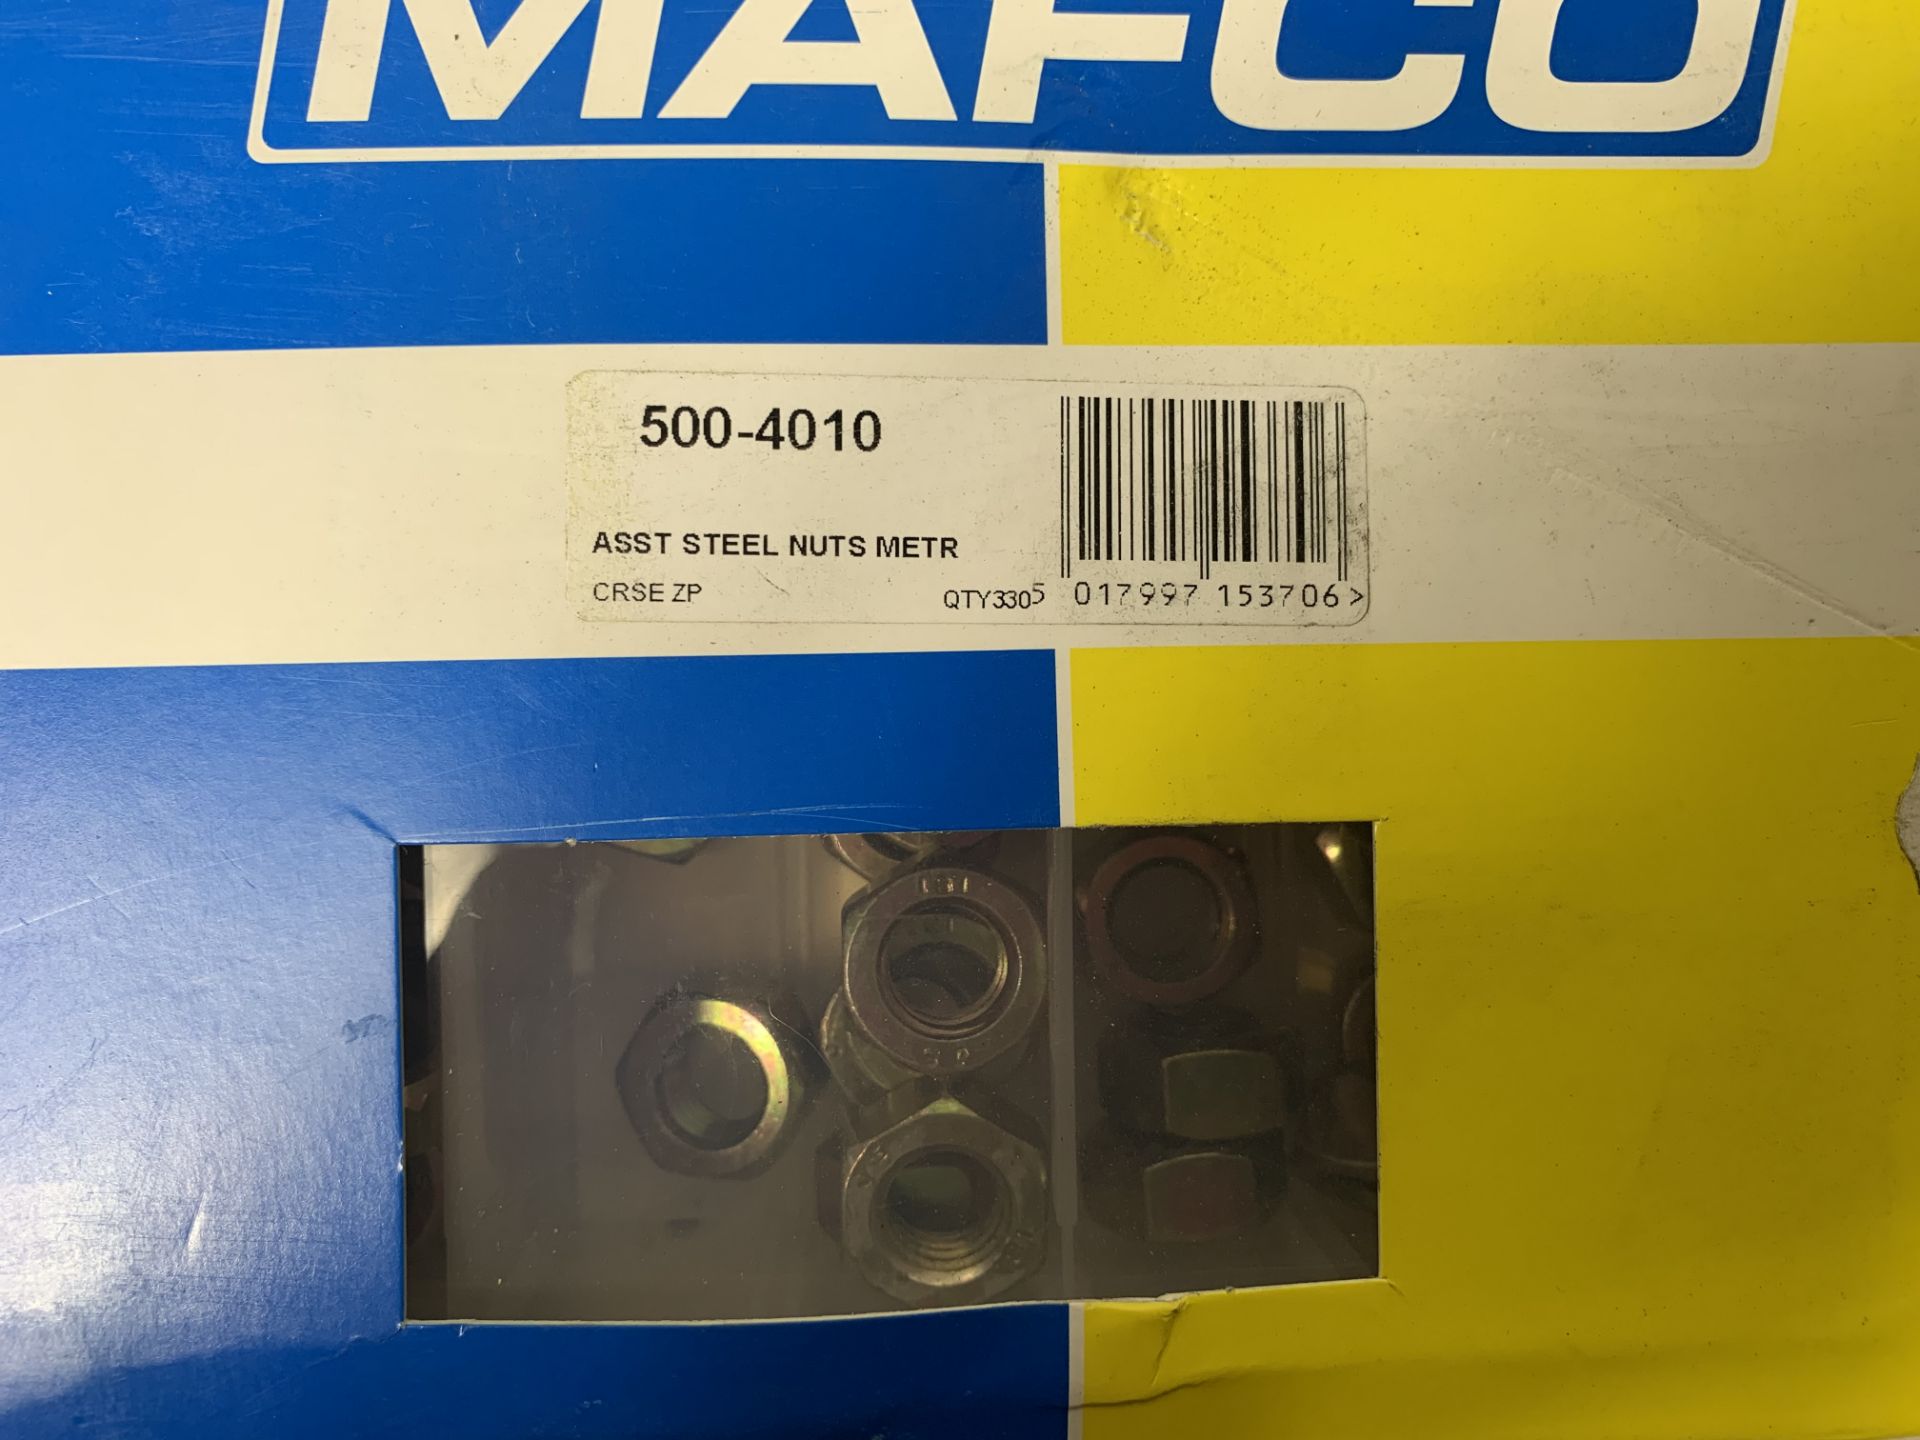 3 x Boxes of Mafco ASST Steel Nuts Metr - Image 2 of 2